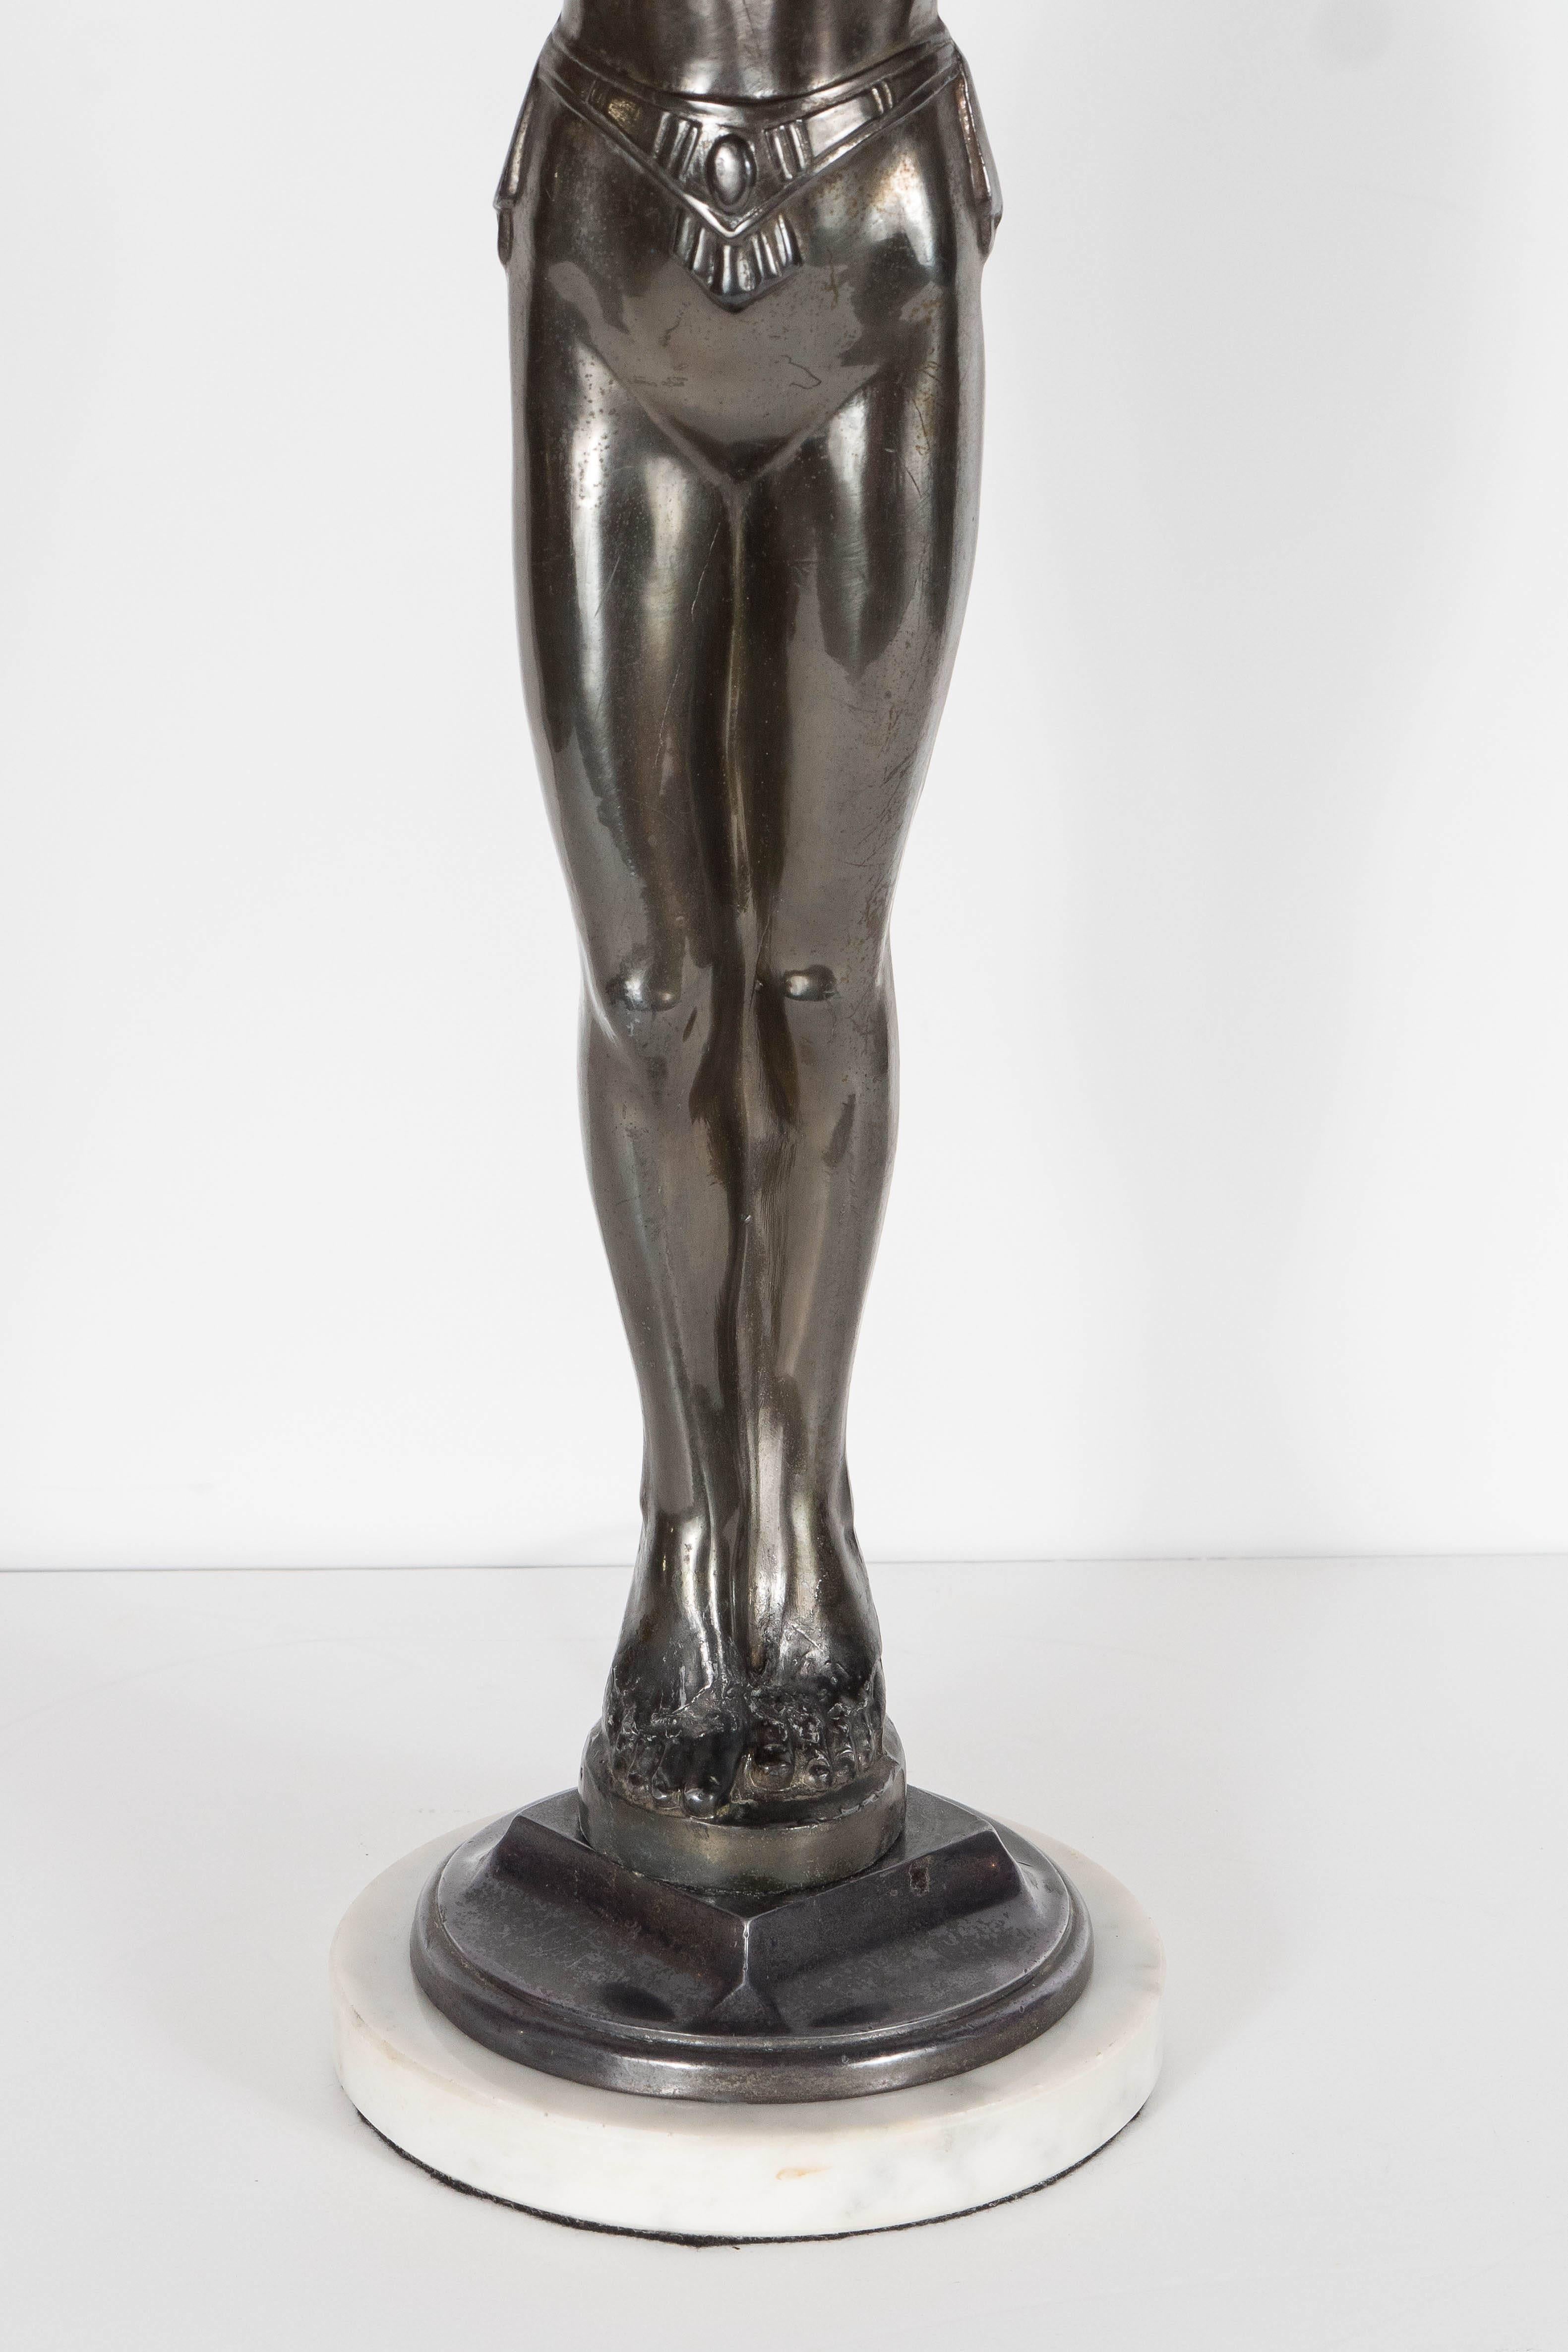 This elegant Art Deco patinated bronze uplight by Everlite features a figurative depiction of a 1920's flapper girl, her body is stretched out to form the stem of the lamp as she reaches up to support a white glass rounded lampshade. She is